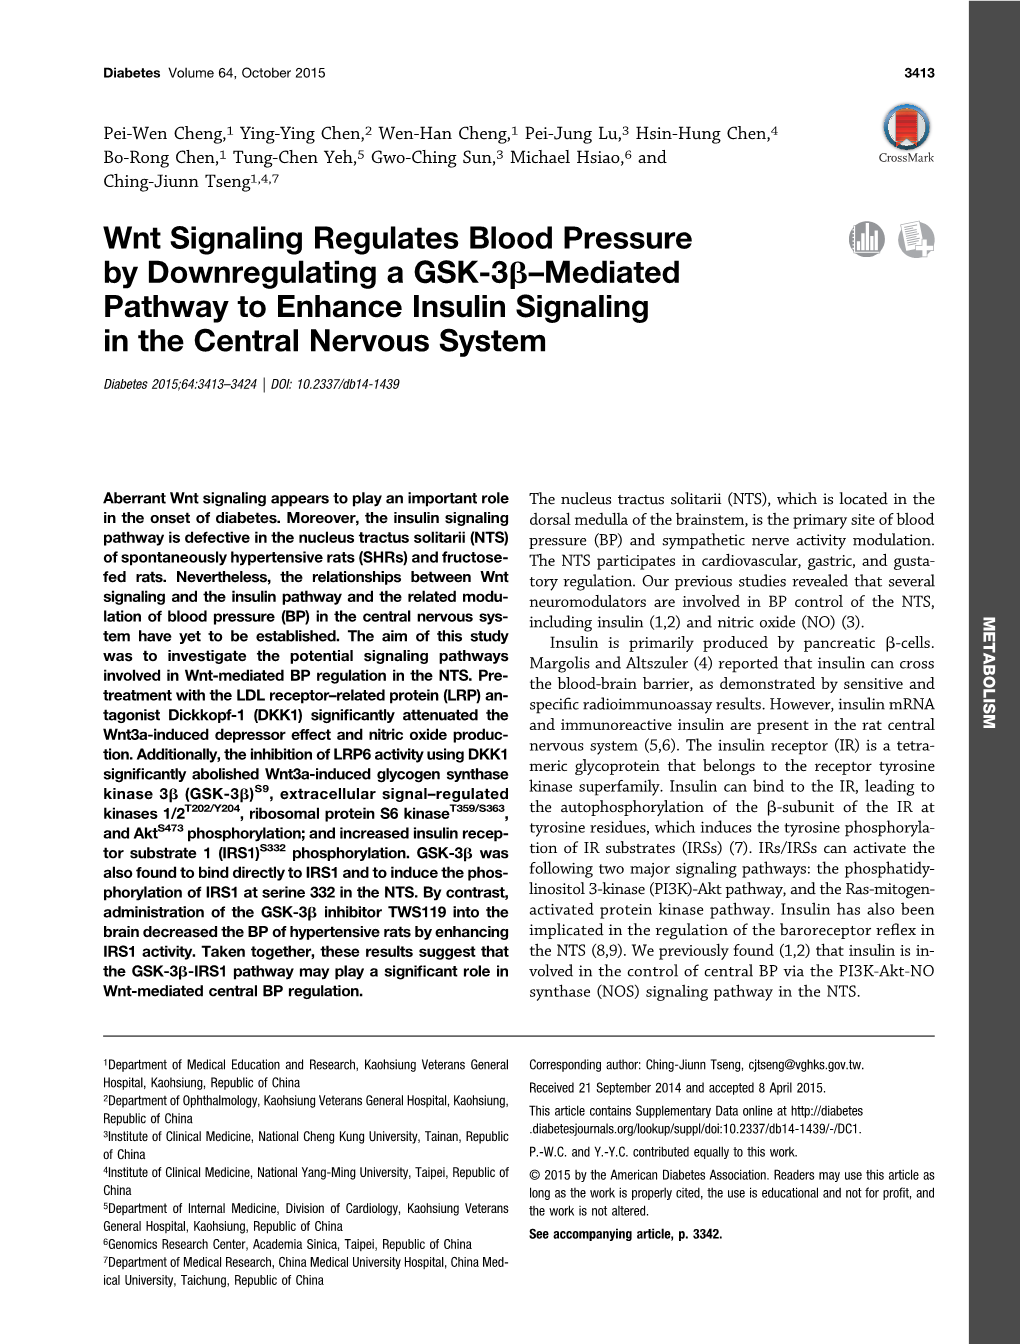 Wnt Signaling Regulates Blood Pressure by Downregulating a GSK-3B–Mediated Pathway to Enhance Insulin Signaling in the Central Nervous System